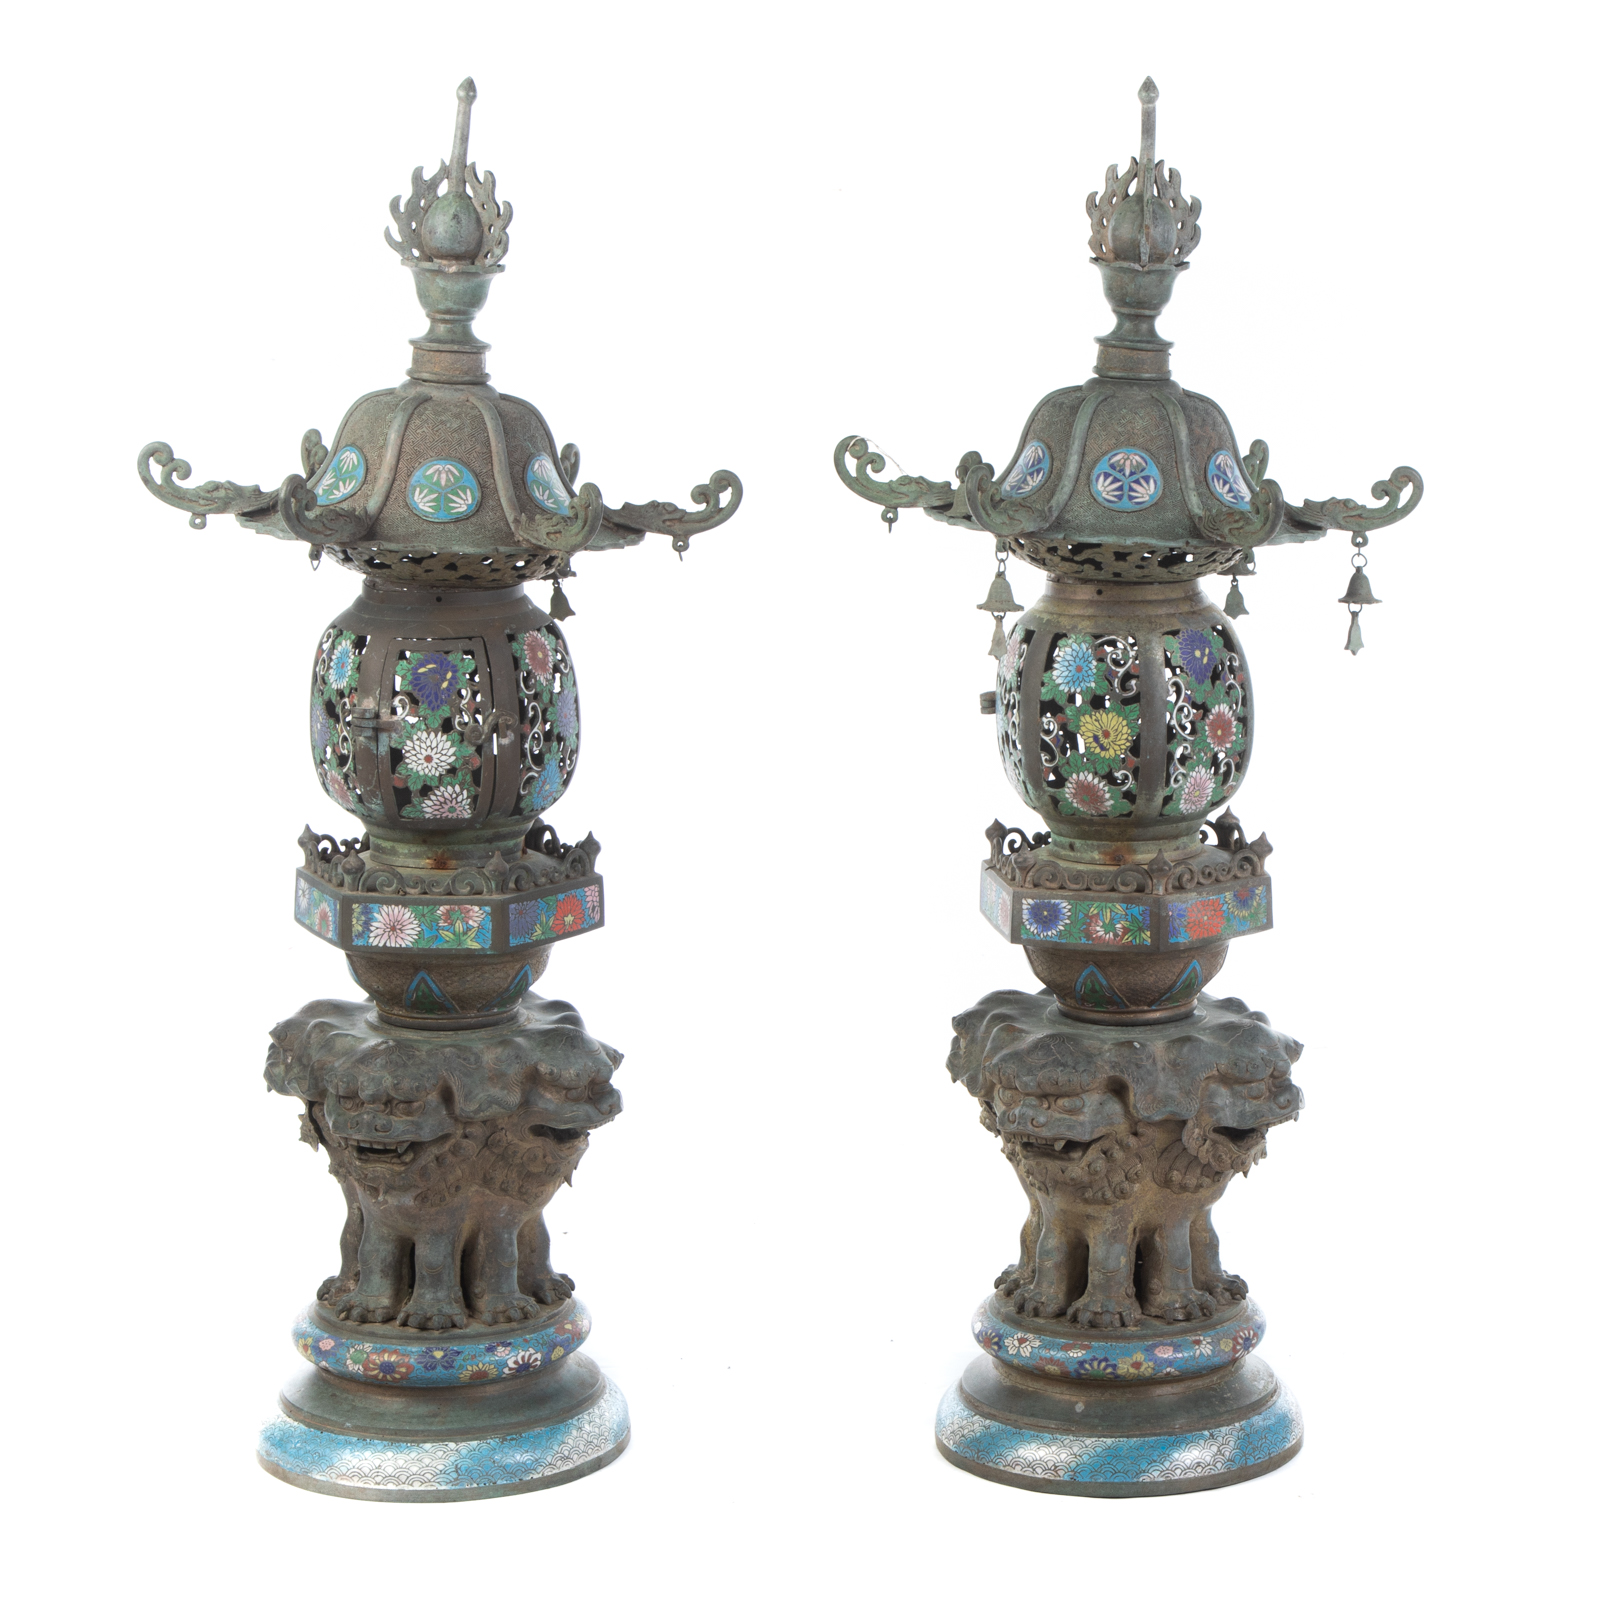 A PAIR OF CHINESE BRONZE & CLOISONNE